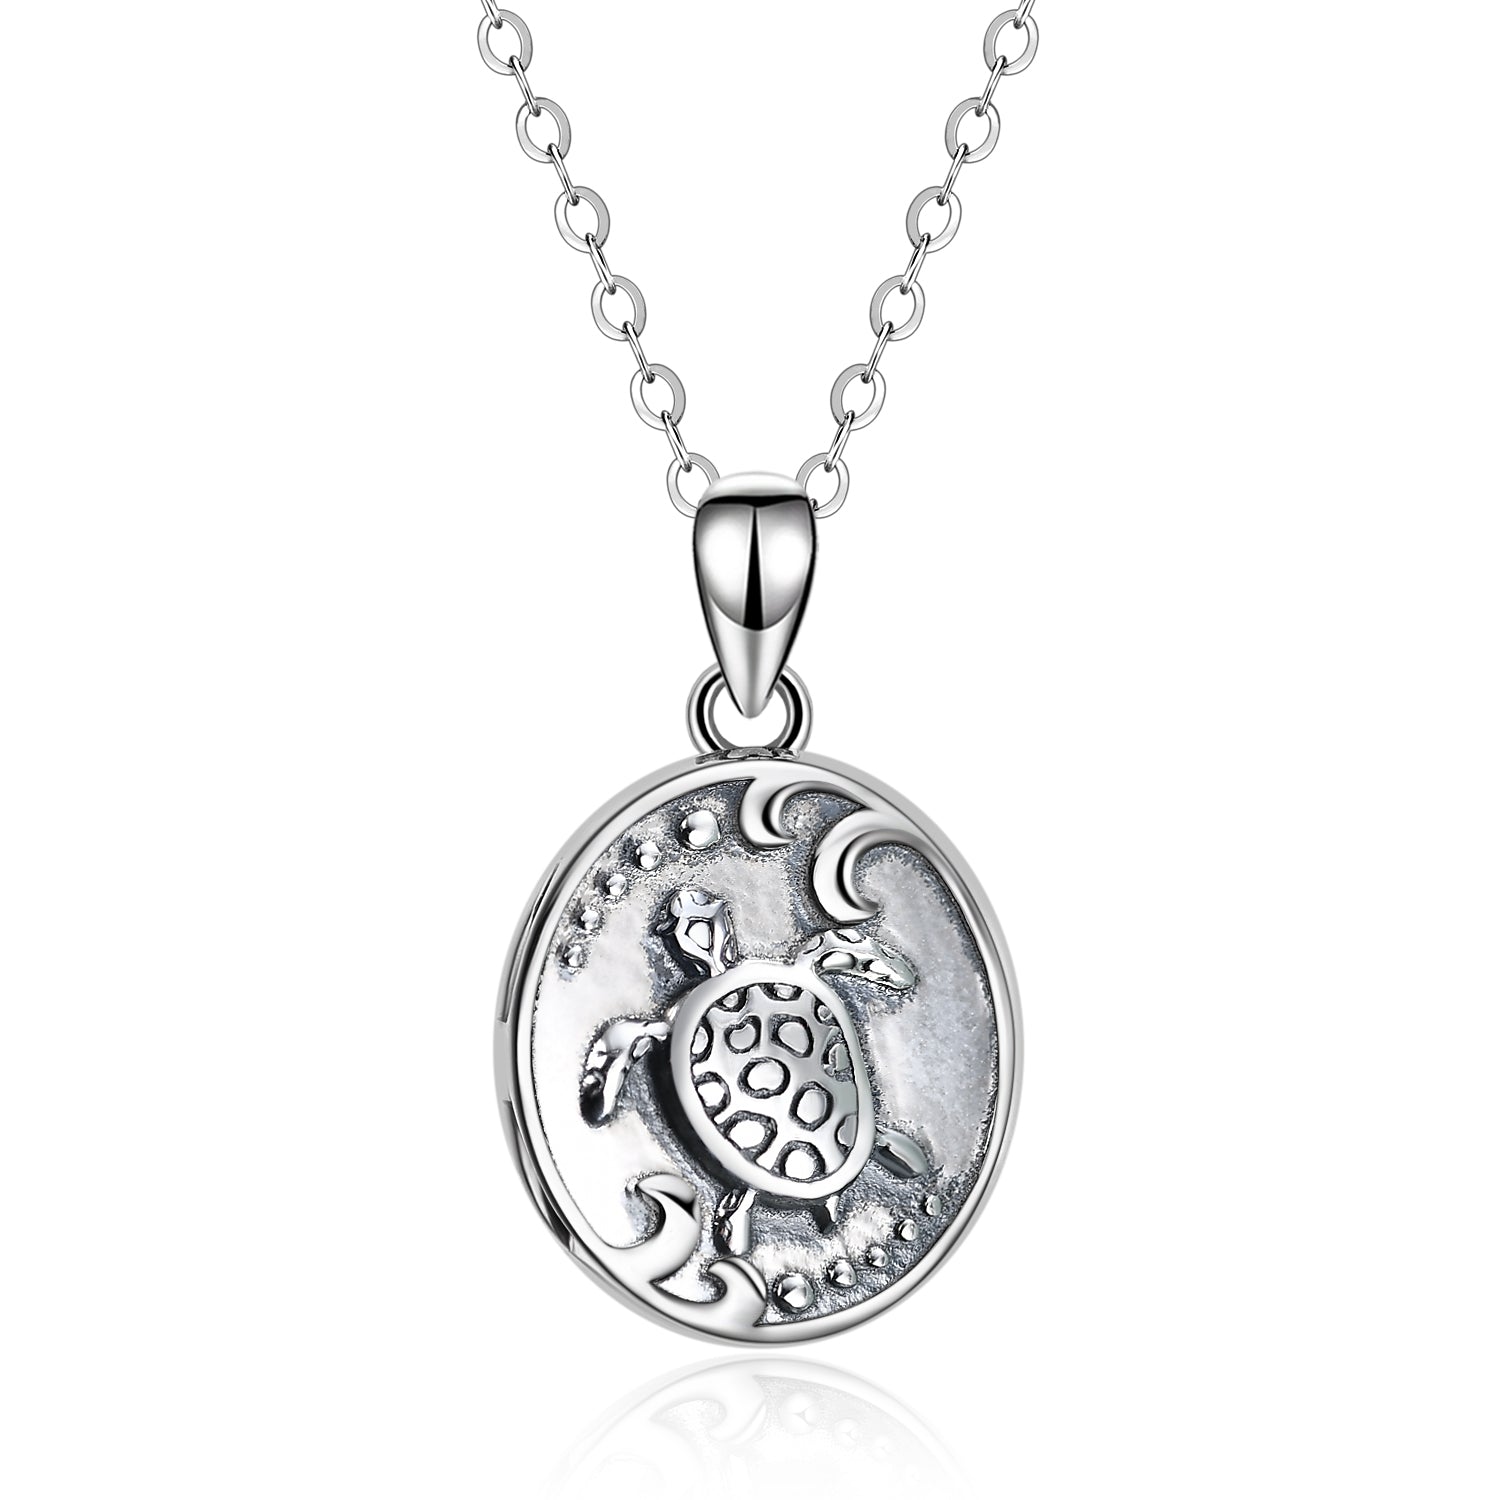 locket-necklaces-that-hold-pictures-sea-turtle-necklace-sterling-sliver-ocean-necklace-health-and-longevity-gifts-for-women-mother-birthday